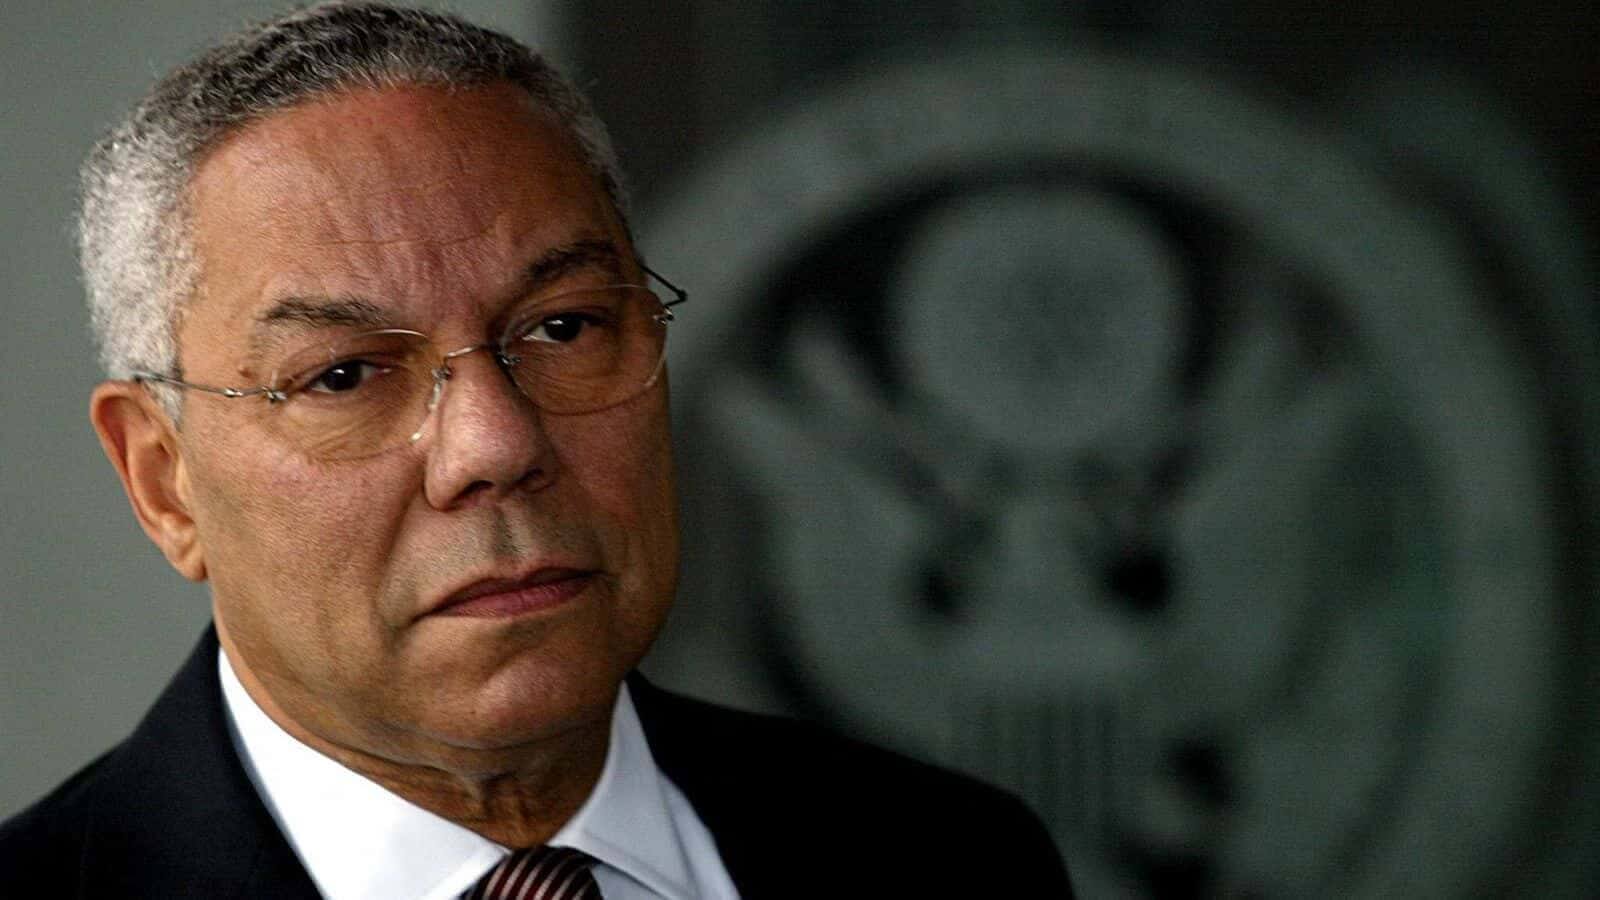 Explainer: Colin Powell’s Foreign Policy Legacy